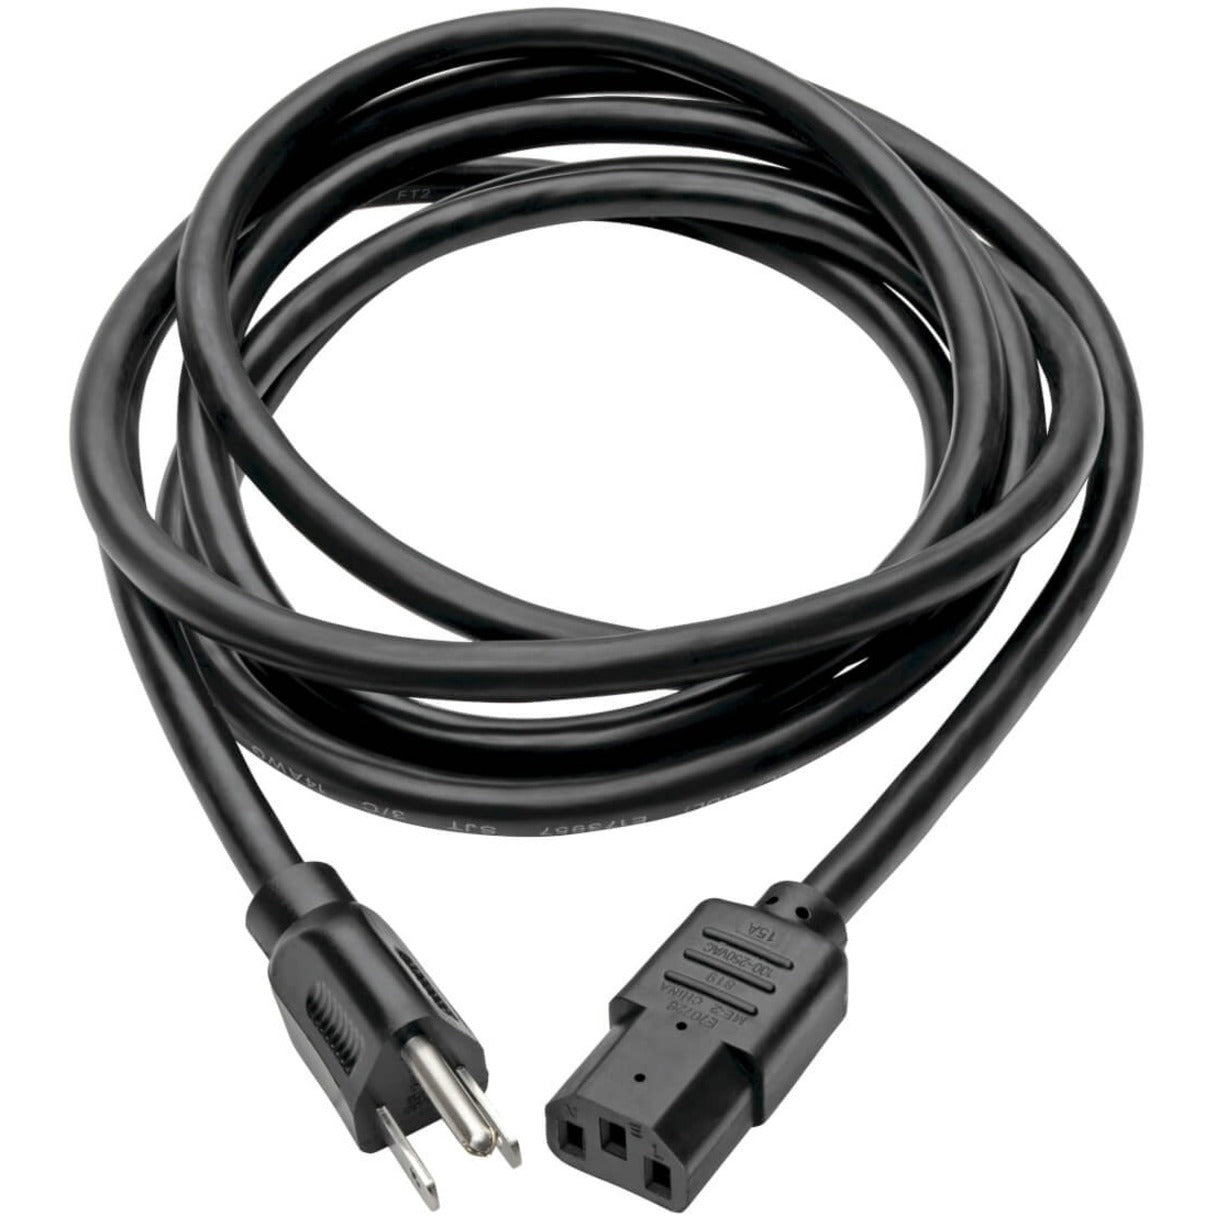 Tripp Lite P007-012 Heavy-Duty Computer Power Cord, 12-ft., UL Listed, RoHS Certified